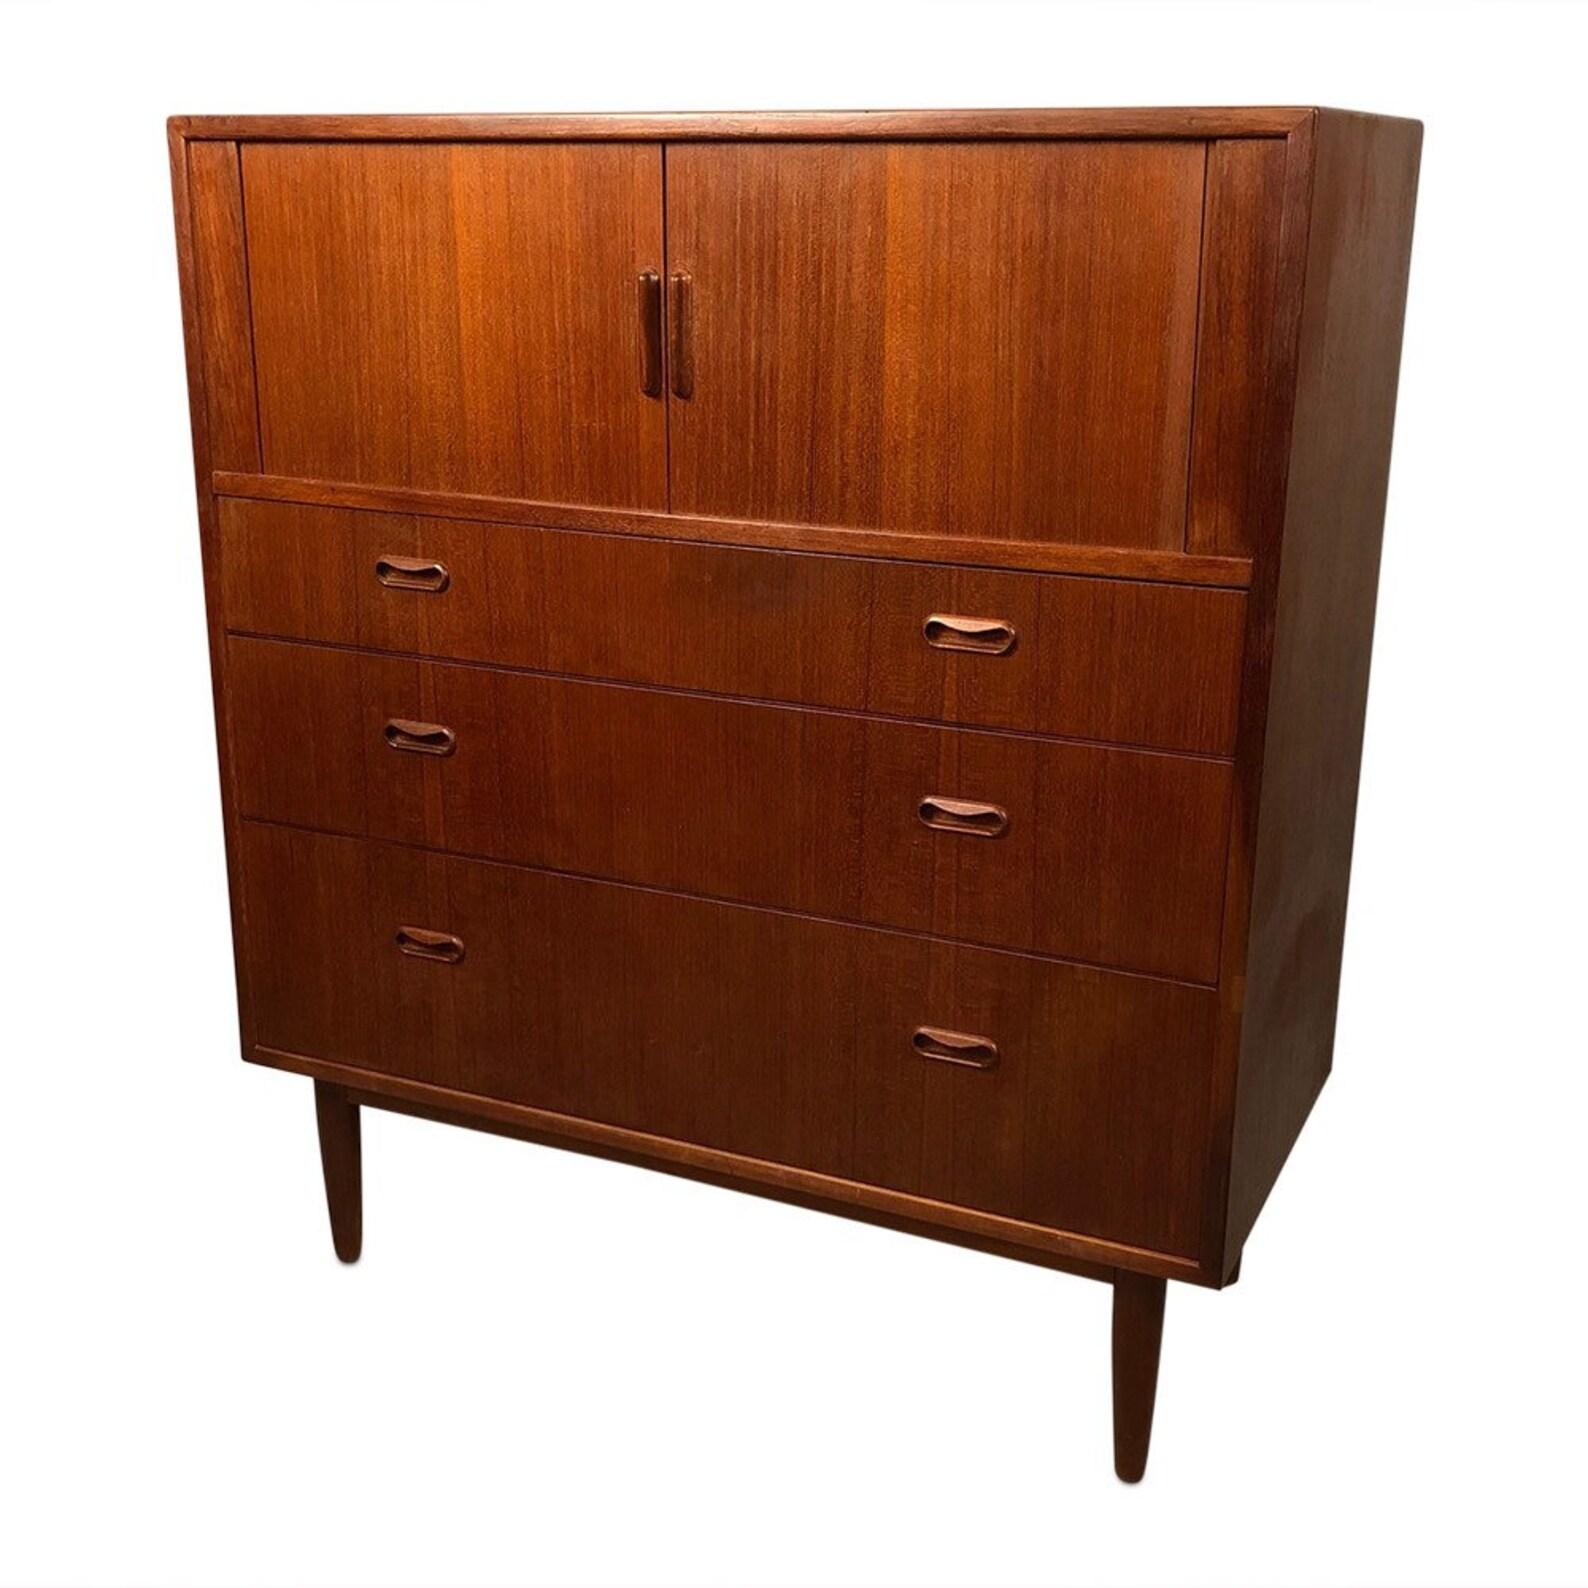 Mid-Century Modern danish teak dresser with tambour sliding doors with three drawers Dimensions: W39 x D18 x 45 inches.